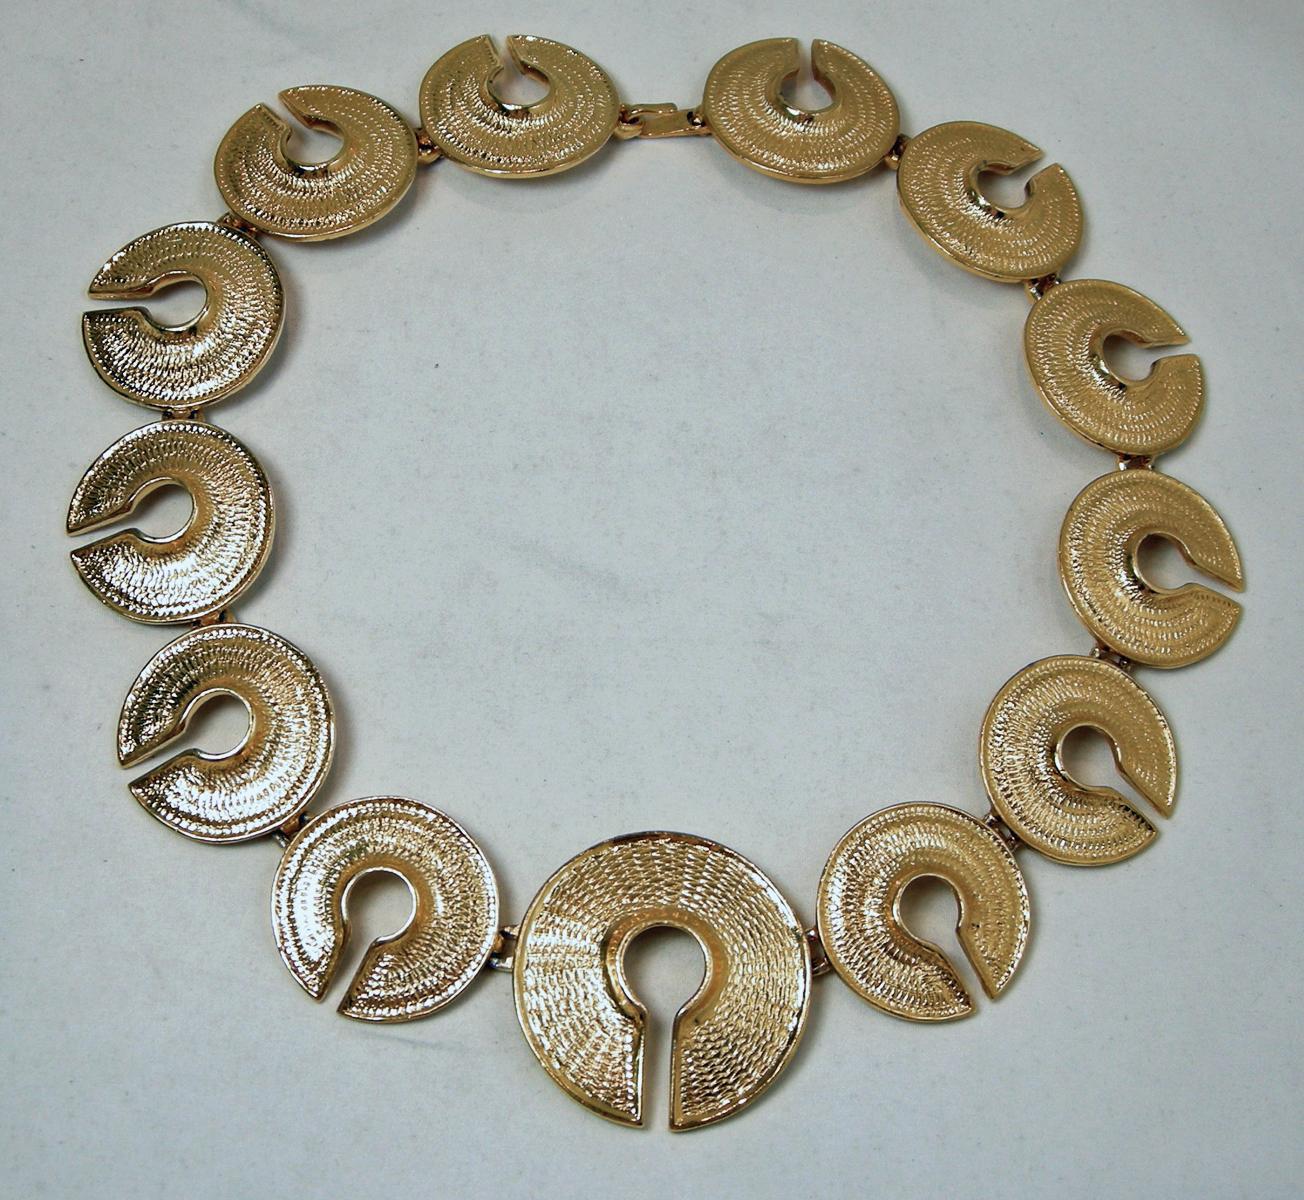 This vintage necklace has textured gold tone circle links going completely around to a hook clasp.  This necklace measures 18” long with the center circle measuring 1-1/2”. The others circular links are 1-1/4”.  This necklace is in excellent